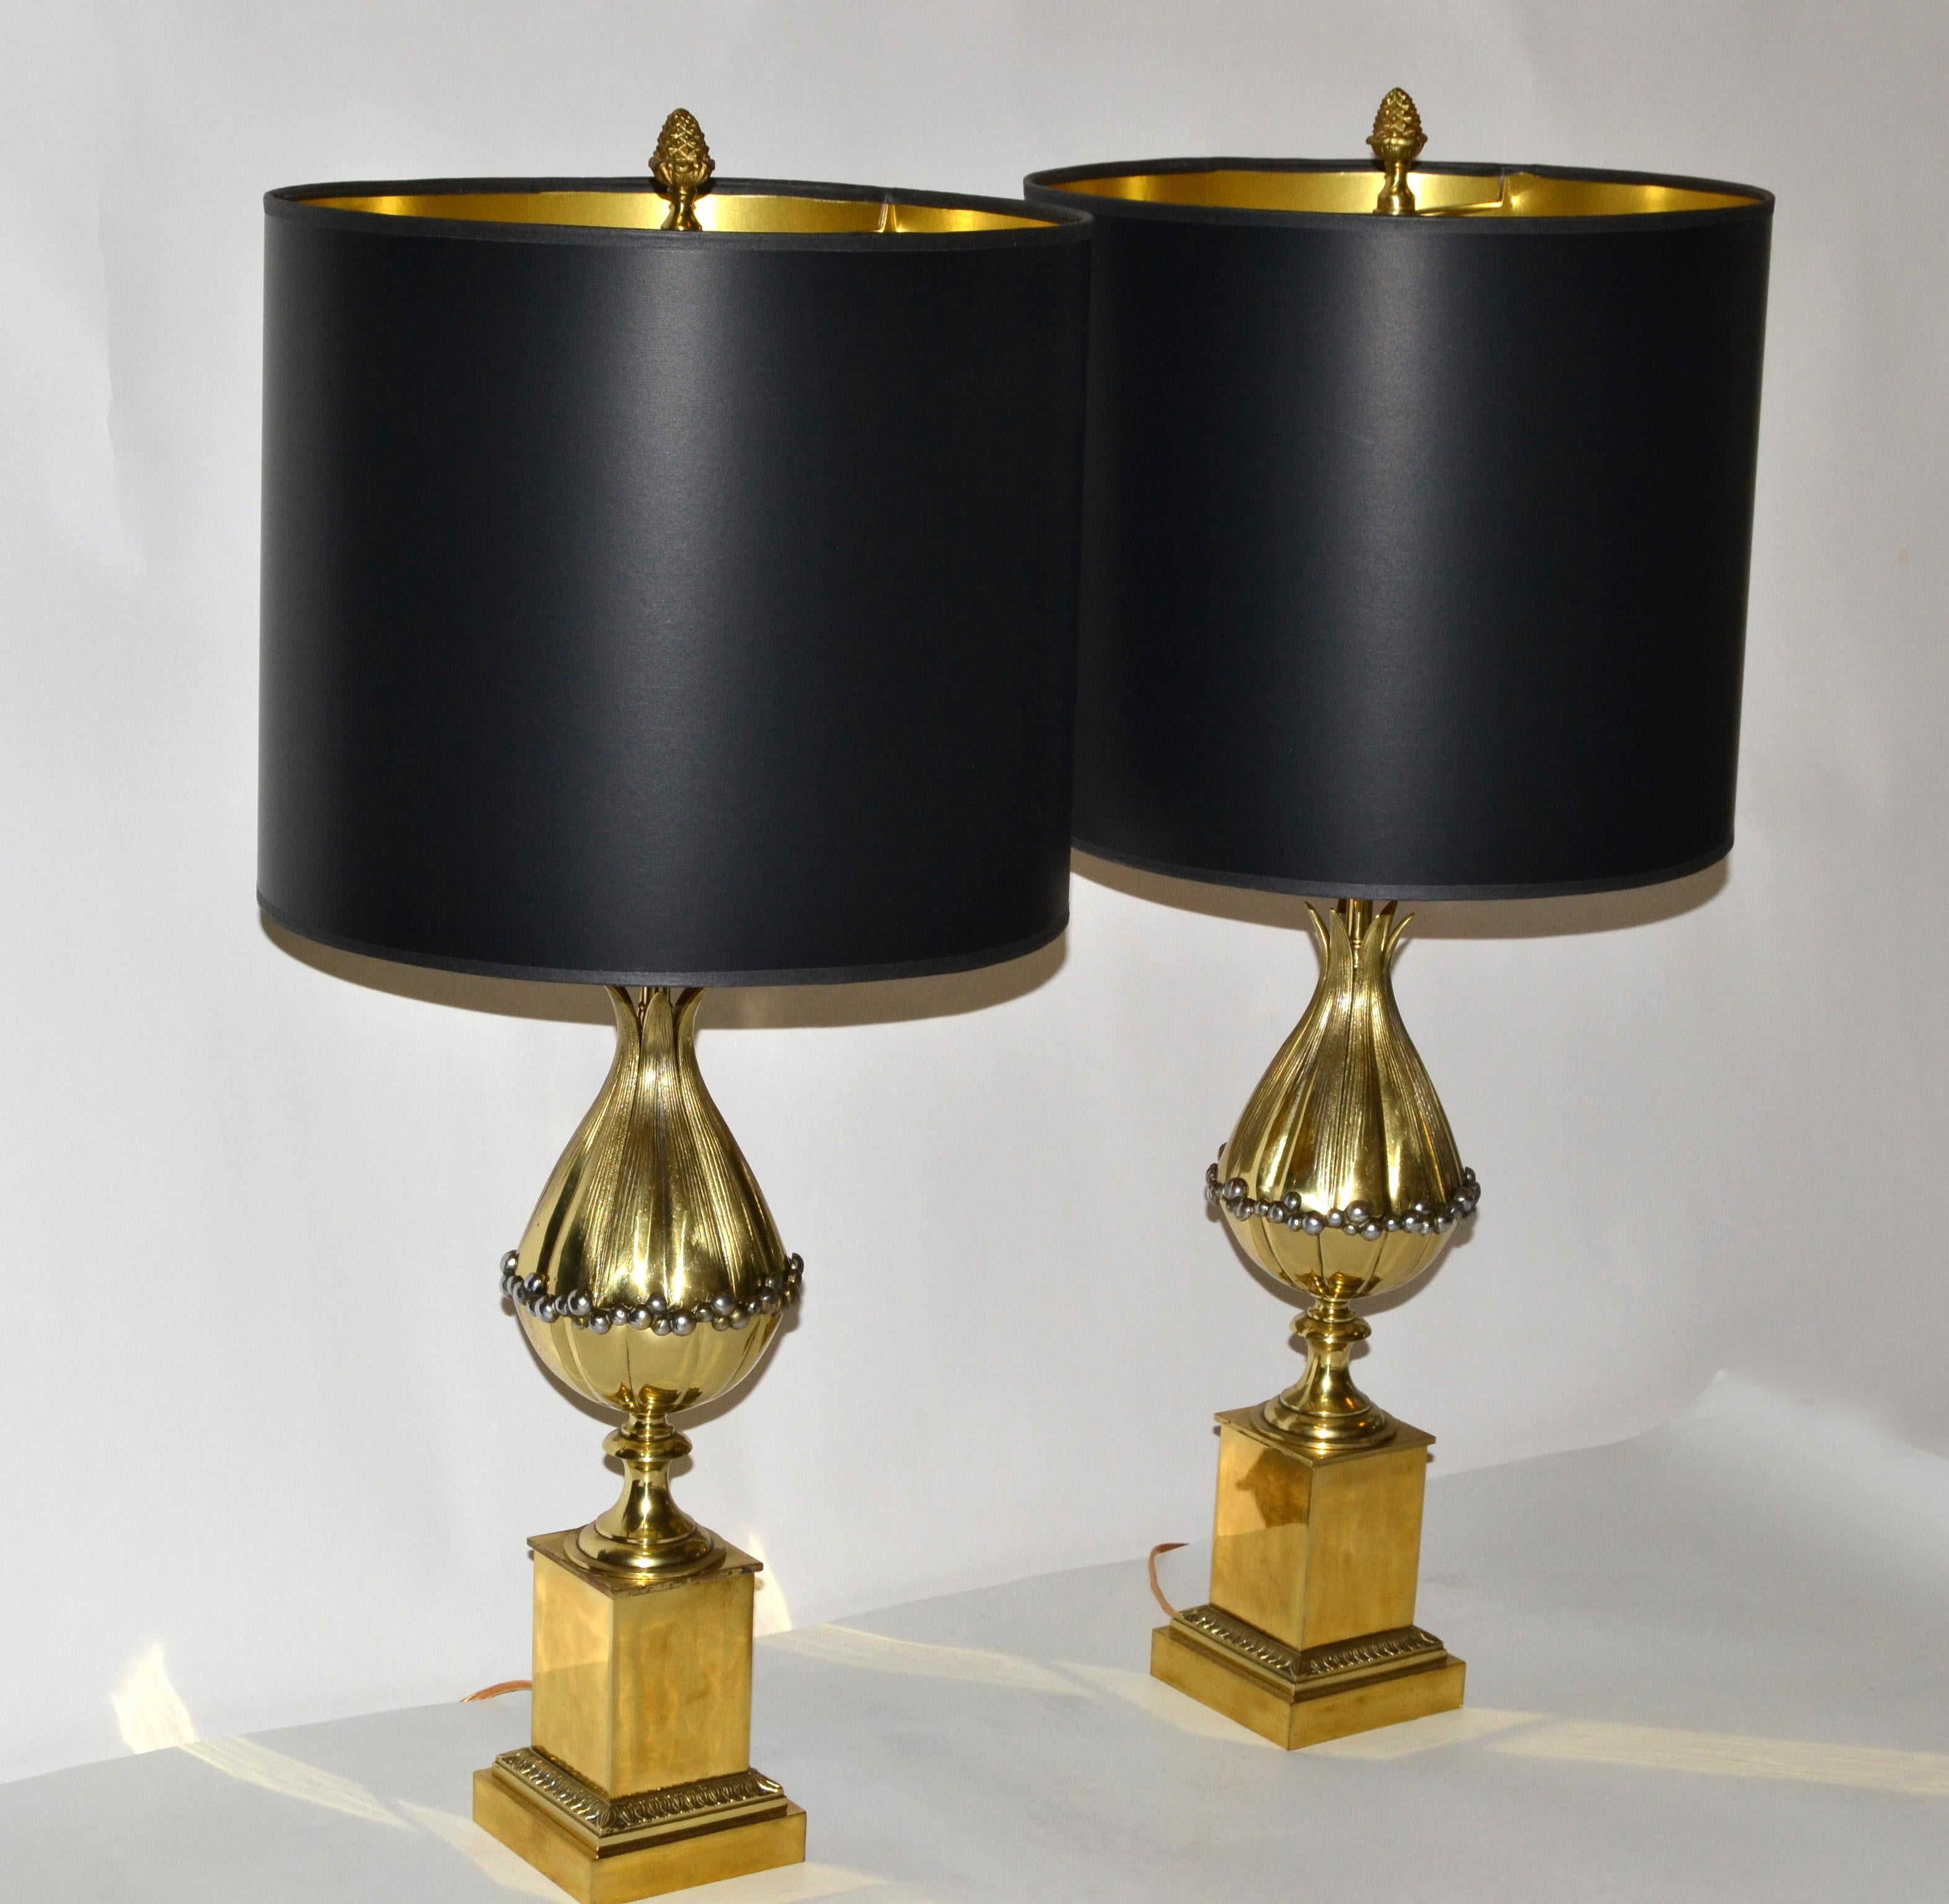 Mid-20th Century Maison Charles French Art Deco Lotus Bronze Table Lamp Black & Gold Shade, Pair For Sale